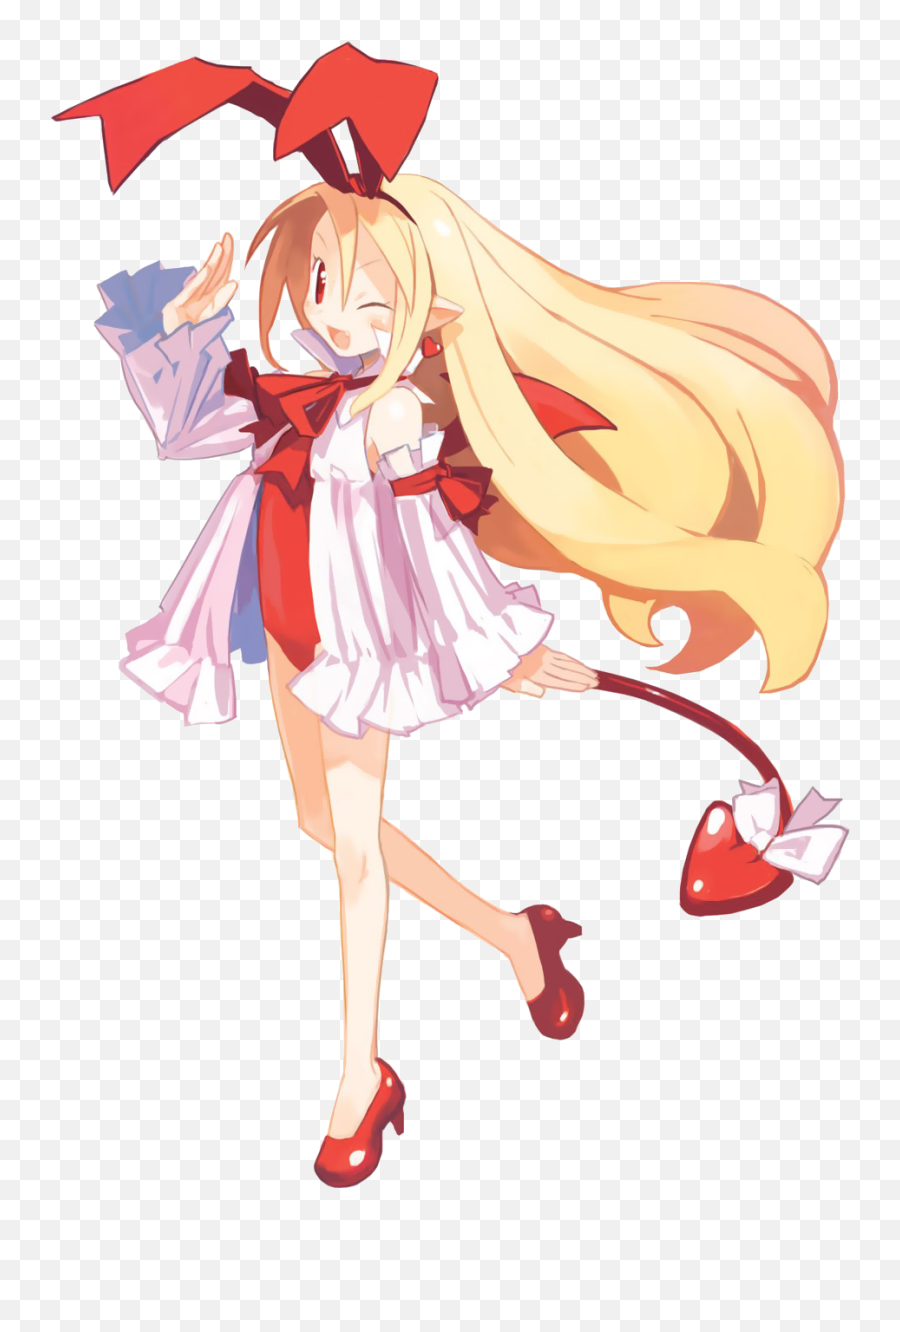 Zero And Aynlie In Oneu0027s True Reflection Rp Freedom Wiki - Flonne Disgaea Emoji,Thums Up Emotions